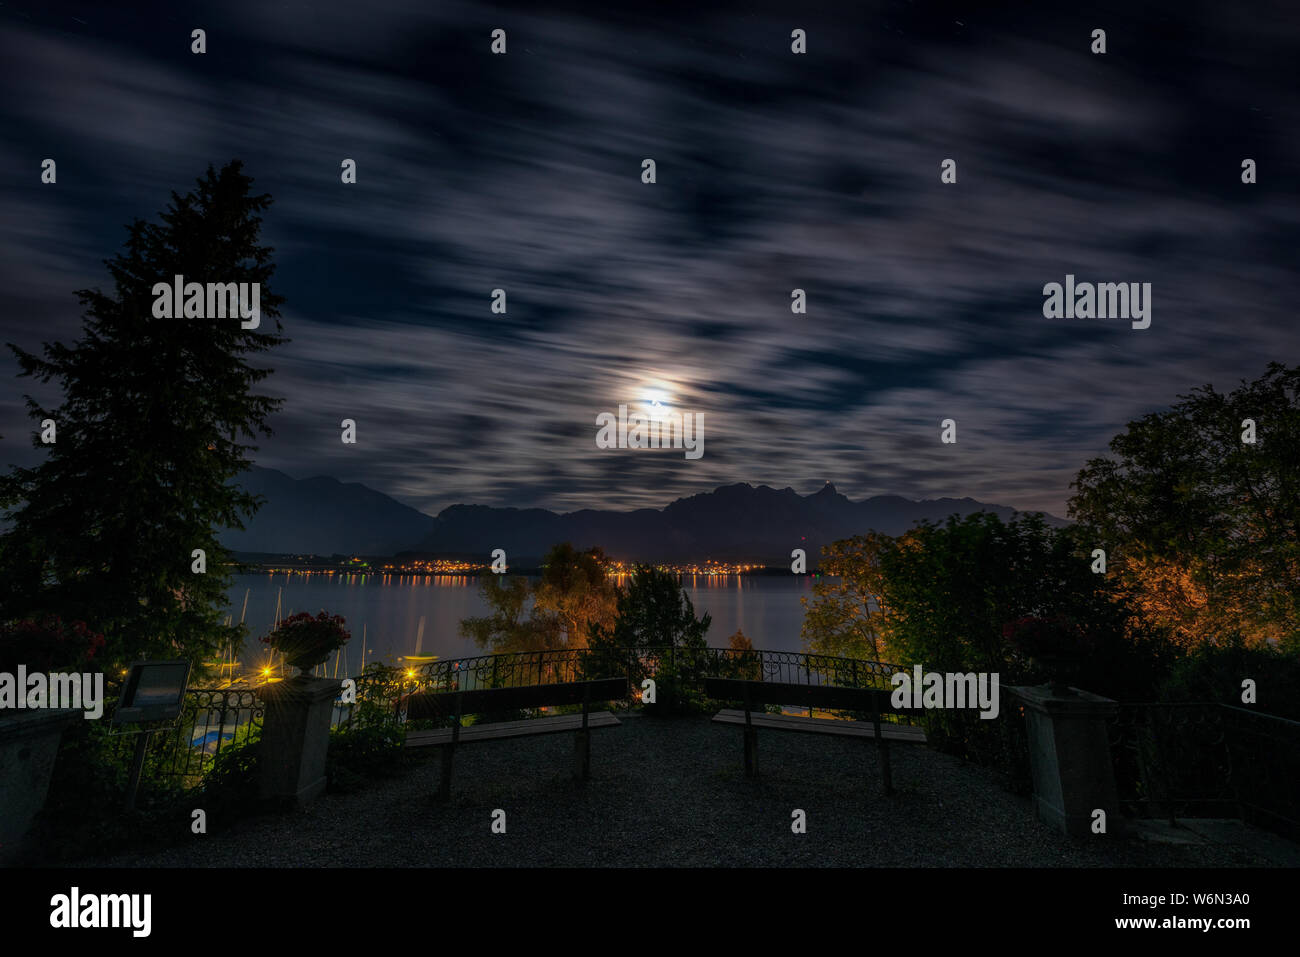 long exposure of a fringed night sky with moonlight over the Stockhorn mountain range, Lake Thun, Hilterfingen marina and two benches and railing of the Hünegg castle park Stock Photo